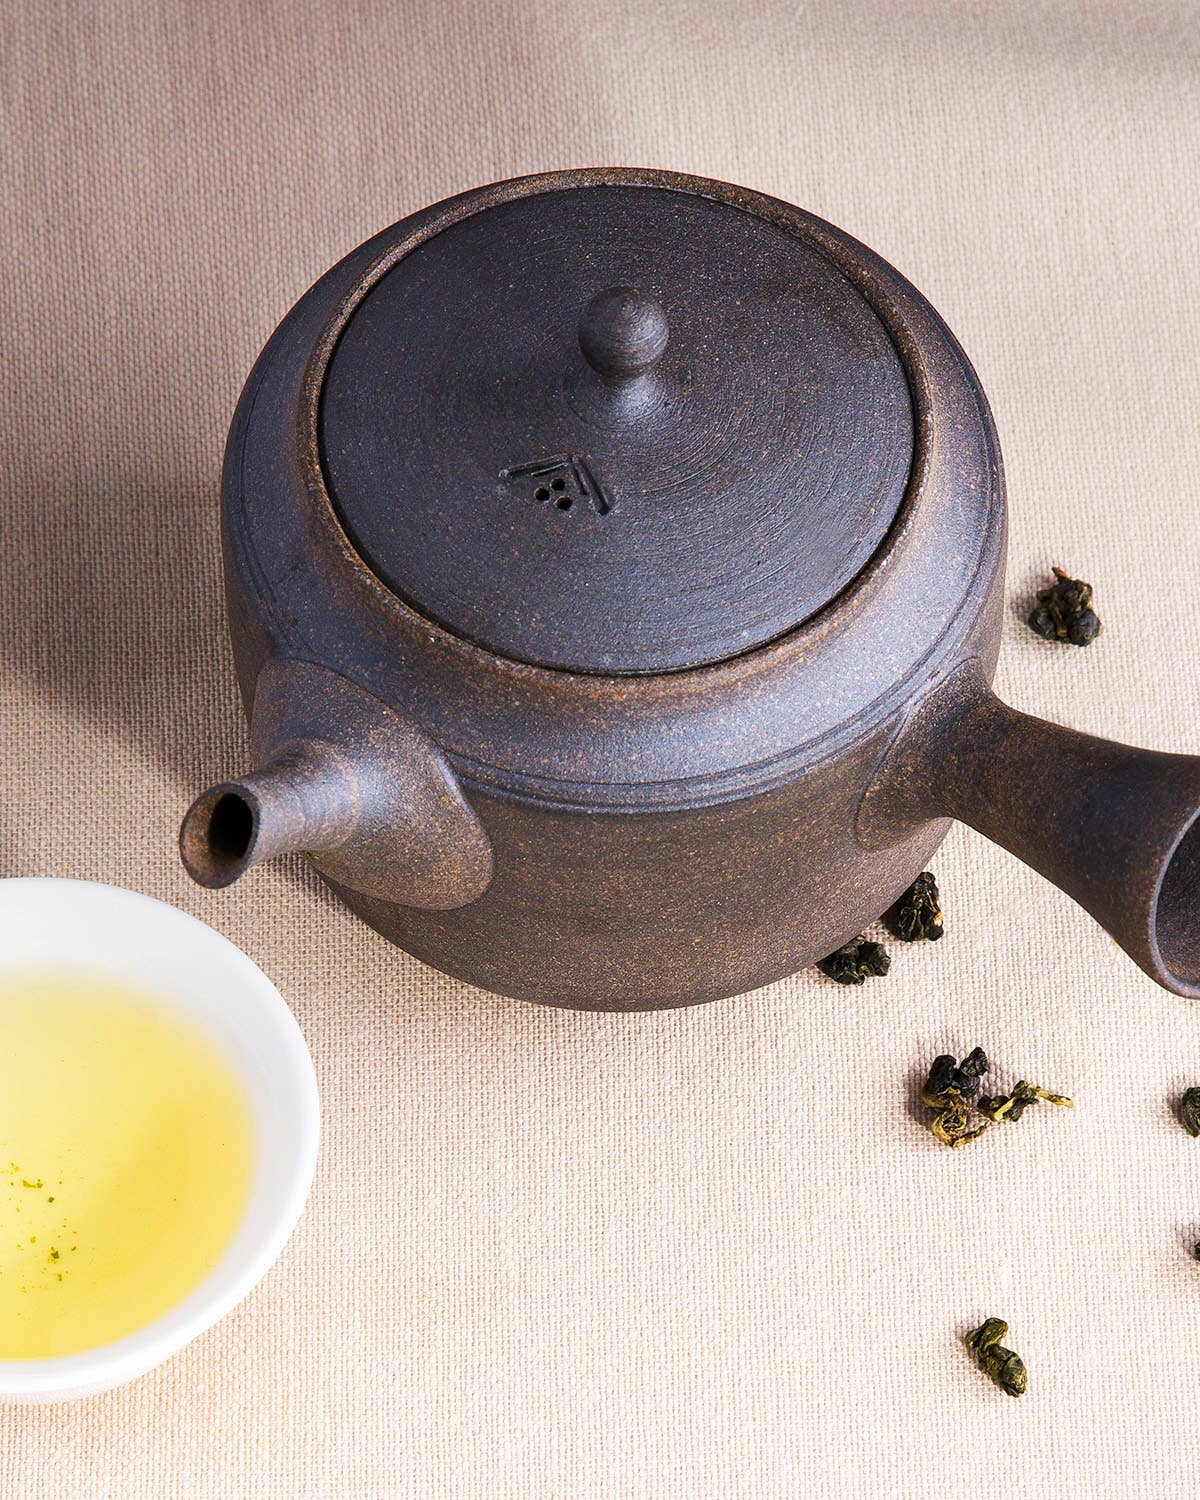 Why (and How) Restaurants Should (and Can) Up Their Tea Service